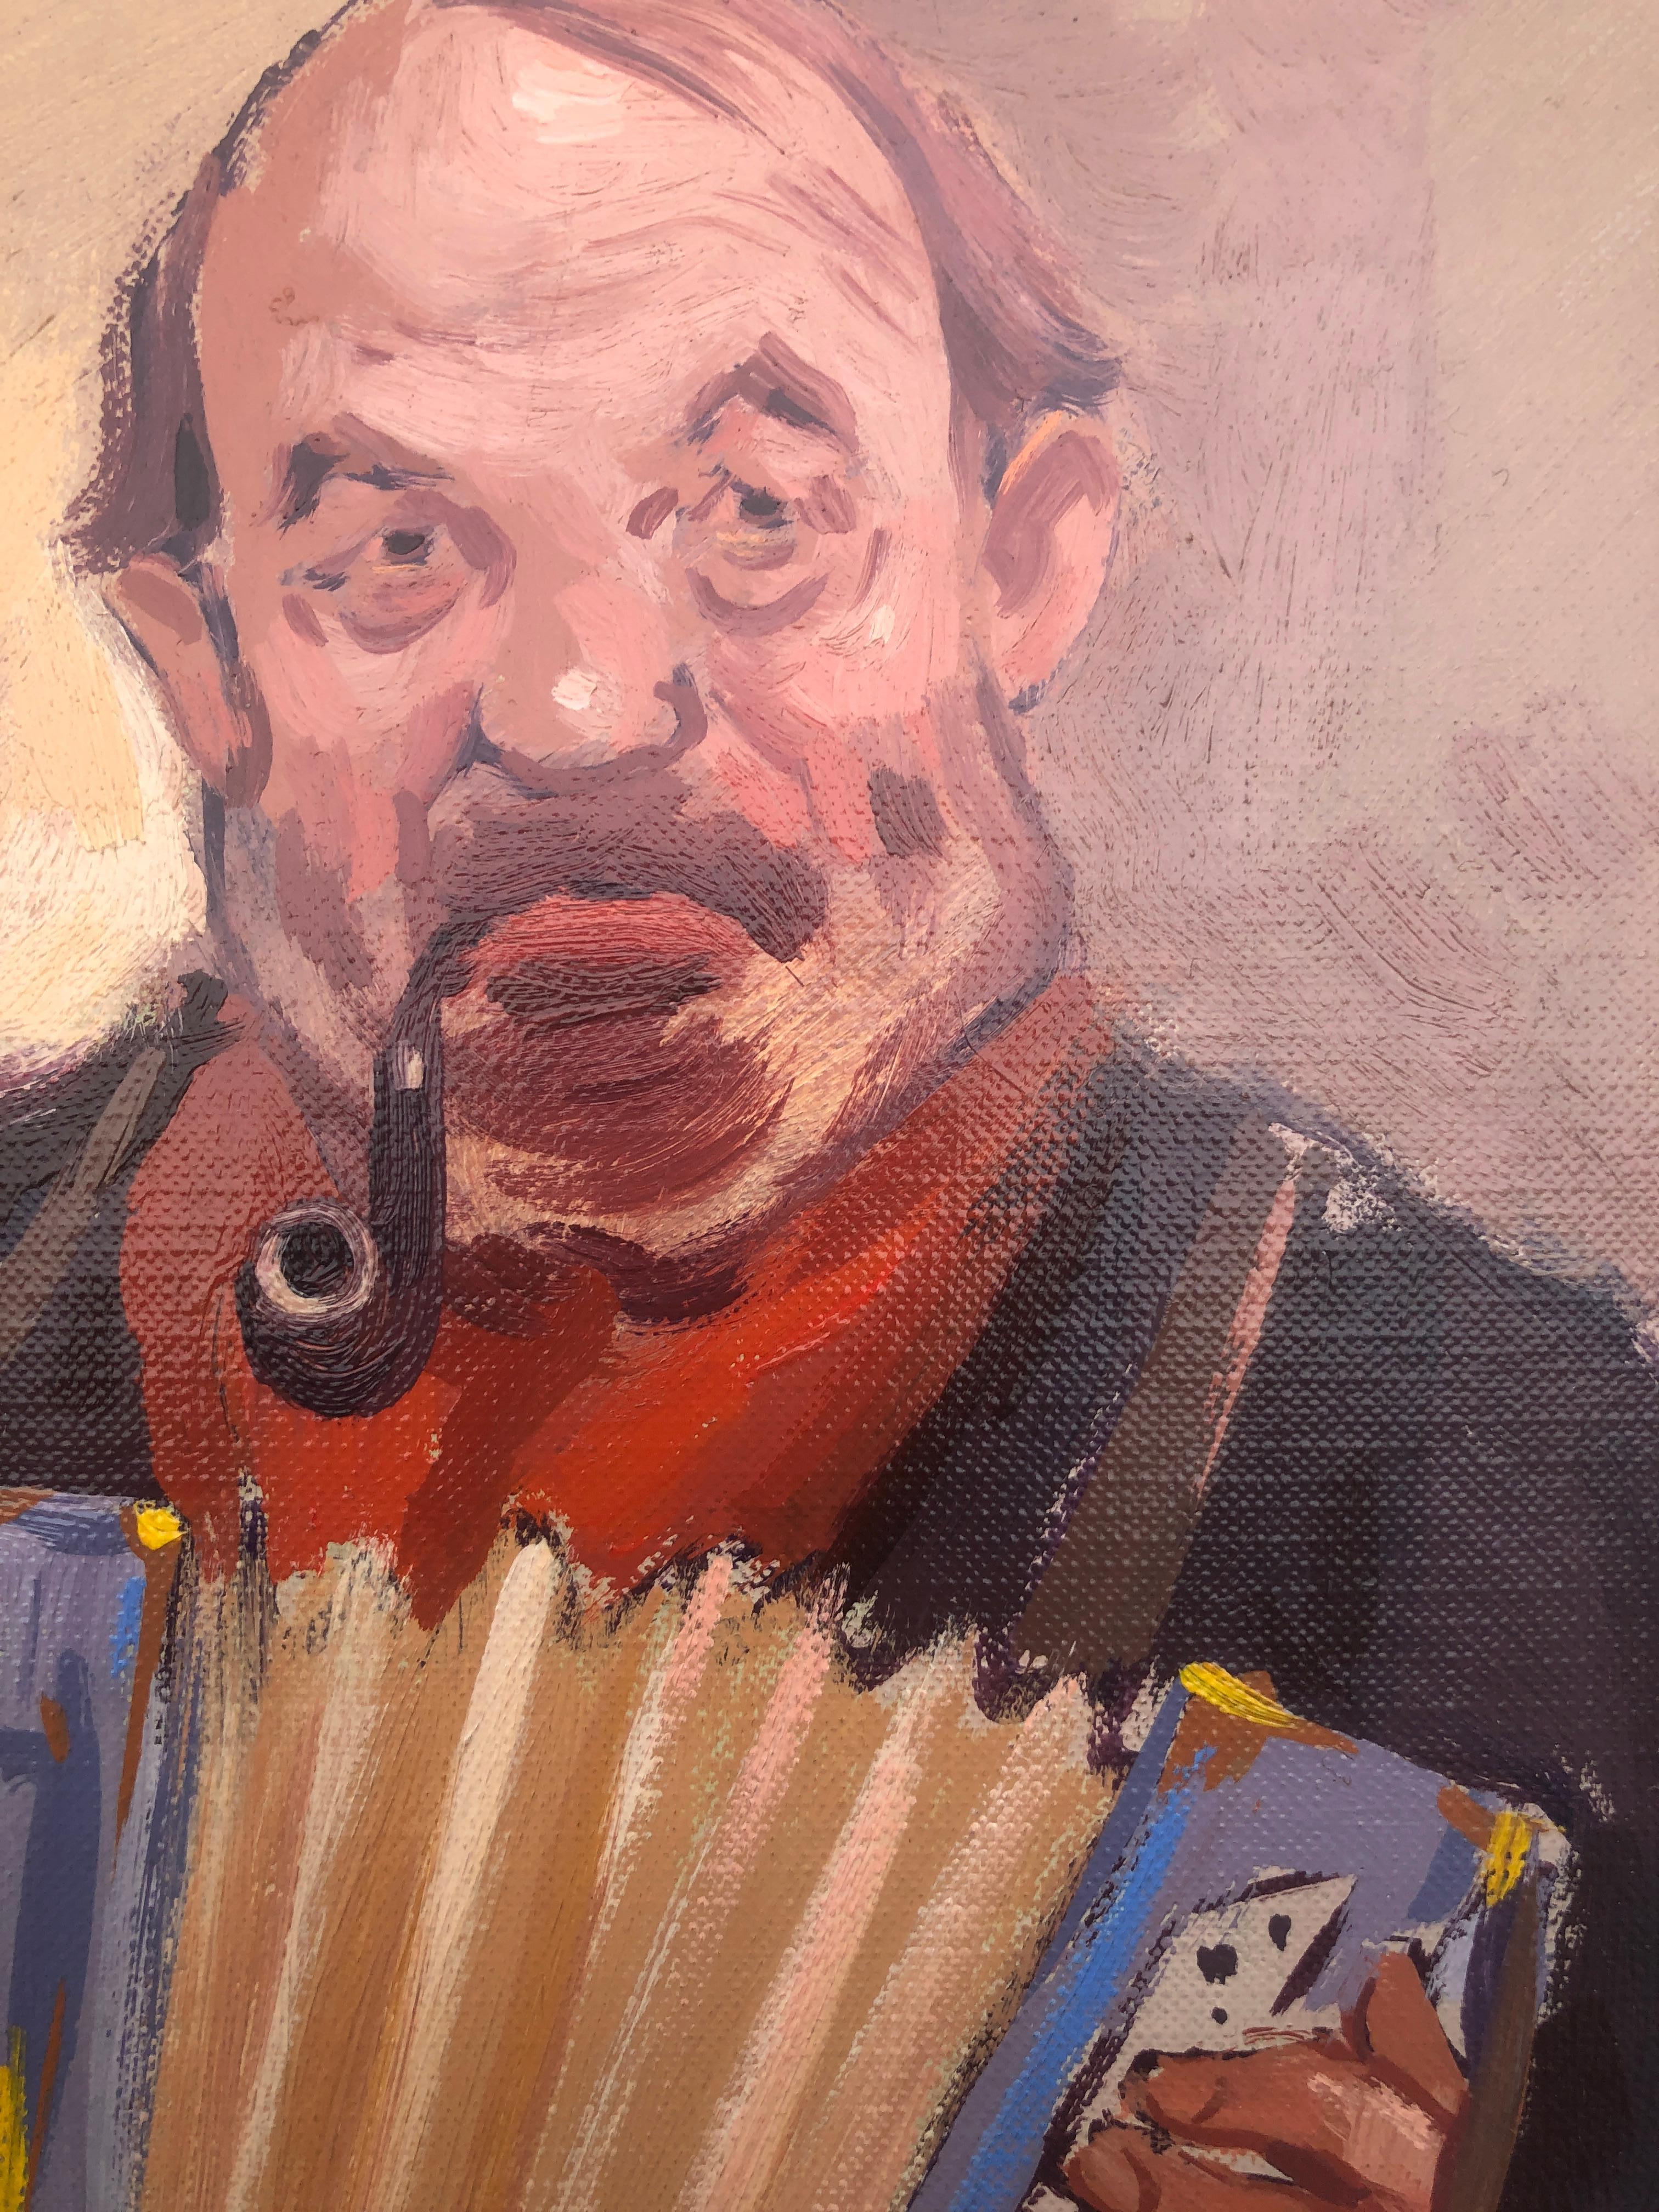 Albert Roca (1945) - accordionist with pipe oil on board painting
Medidas óleo 47x34 cm.
Medidas marco 62x48 cm.

Painter of landscapes and figures, in whose characterization he deepens psychologically capturing the character, Albert

Roca has won